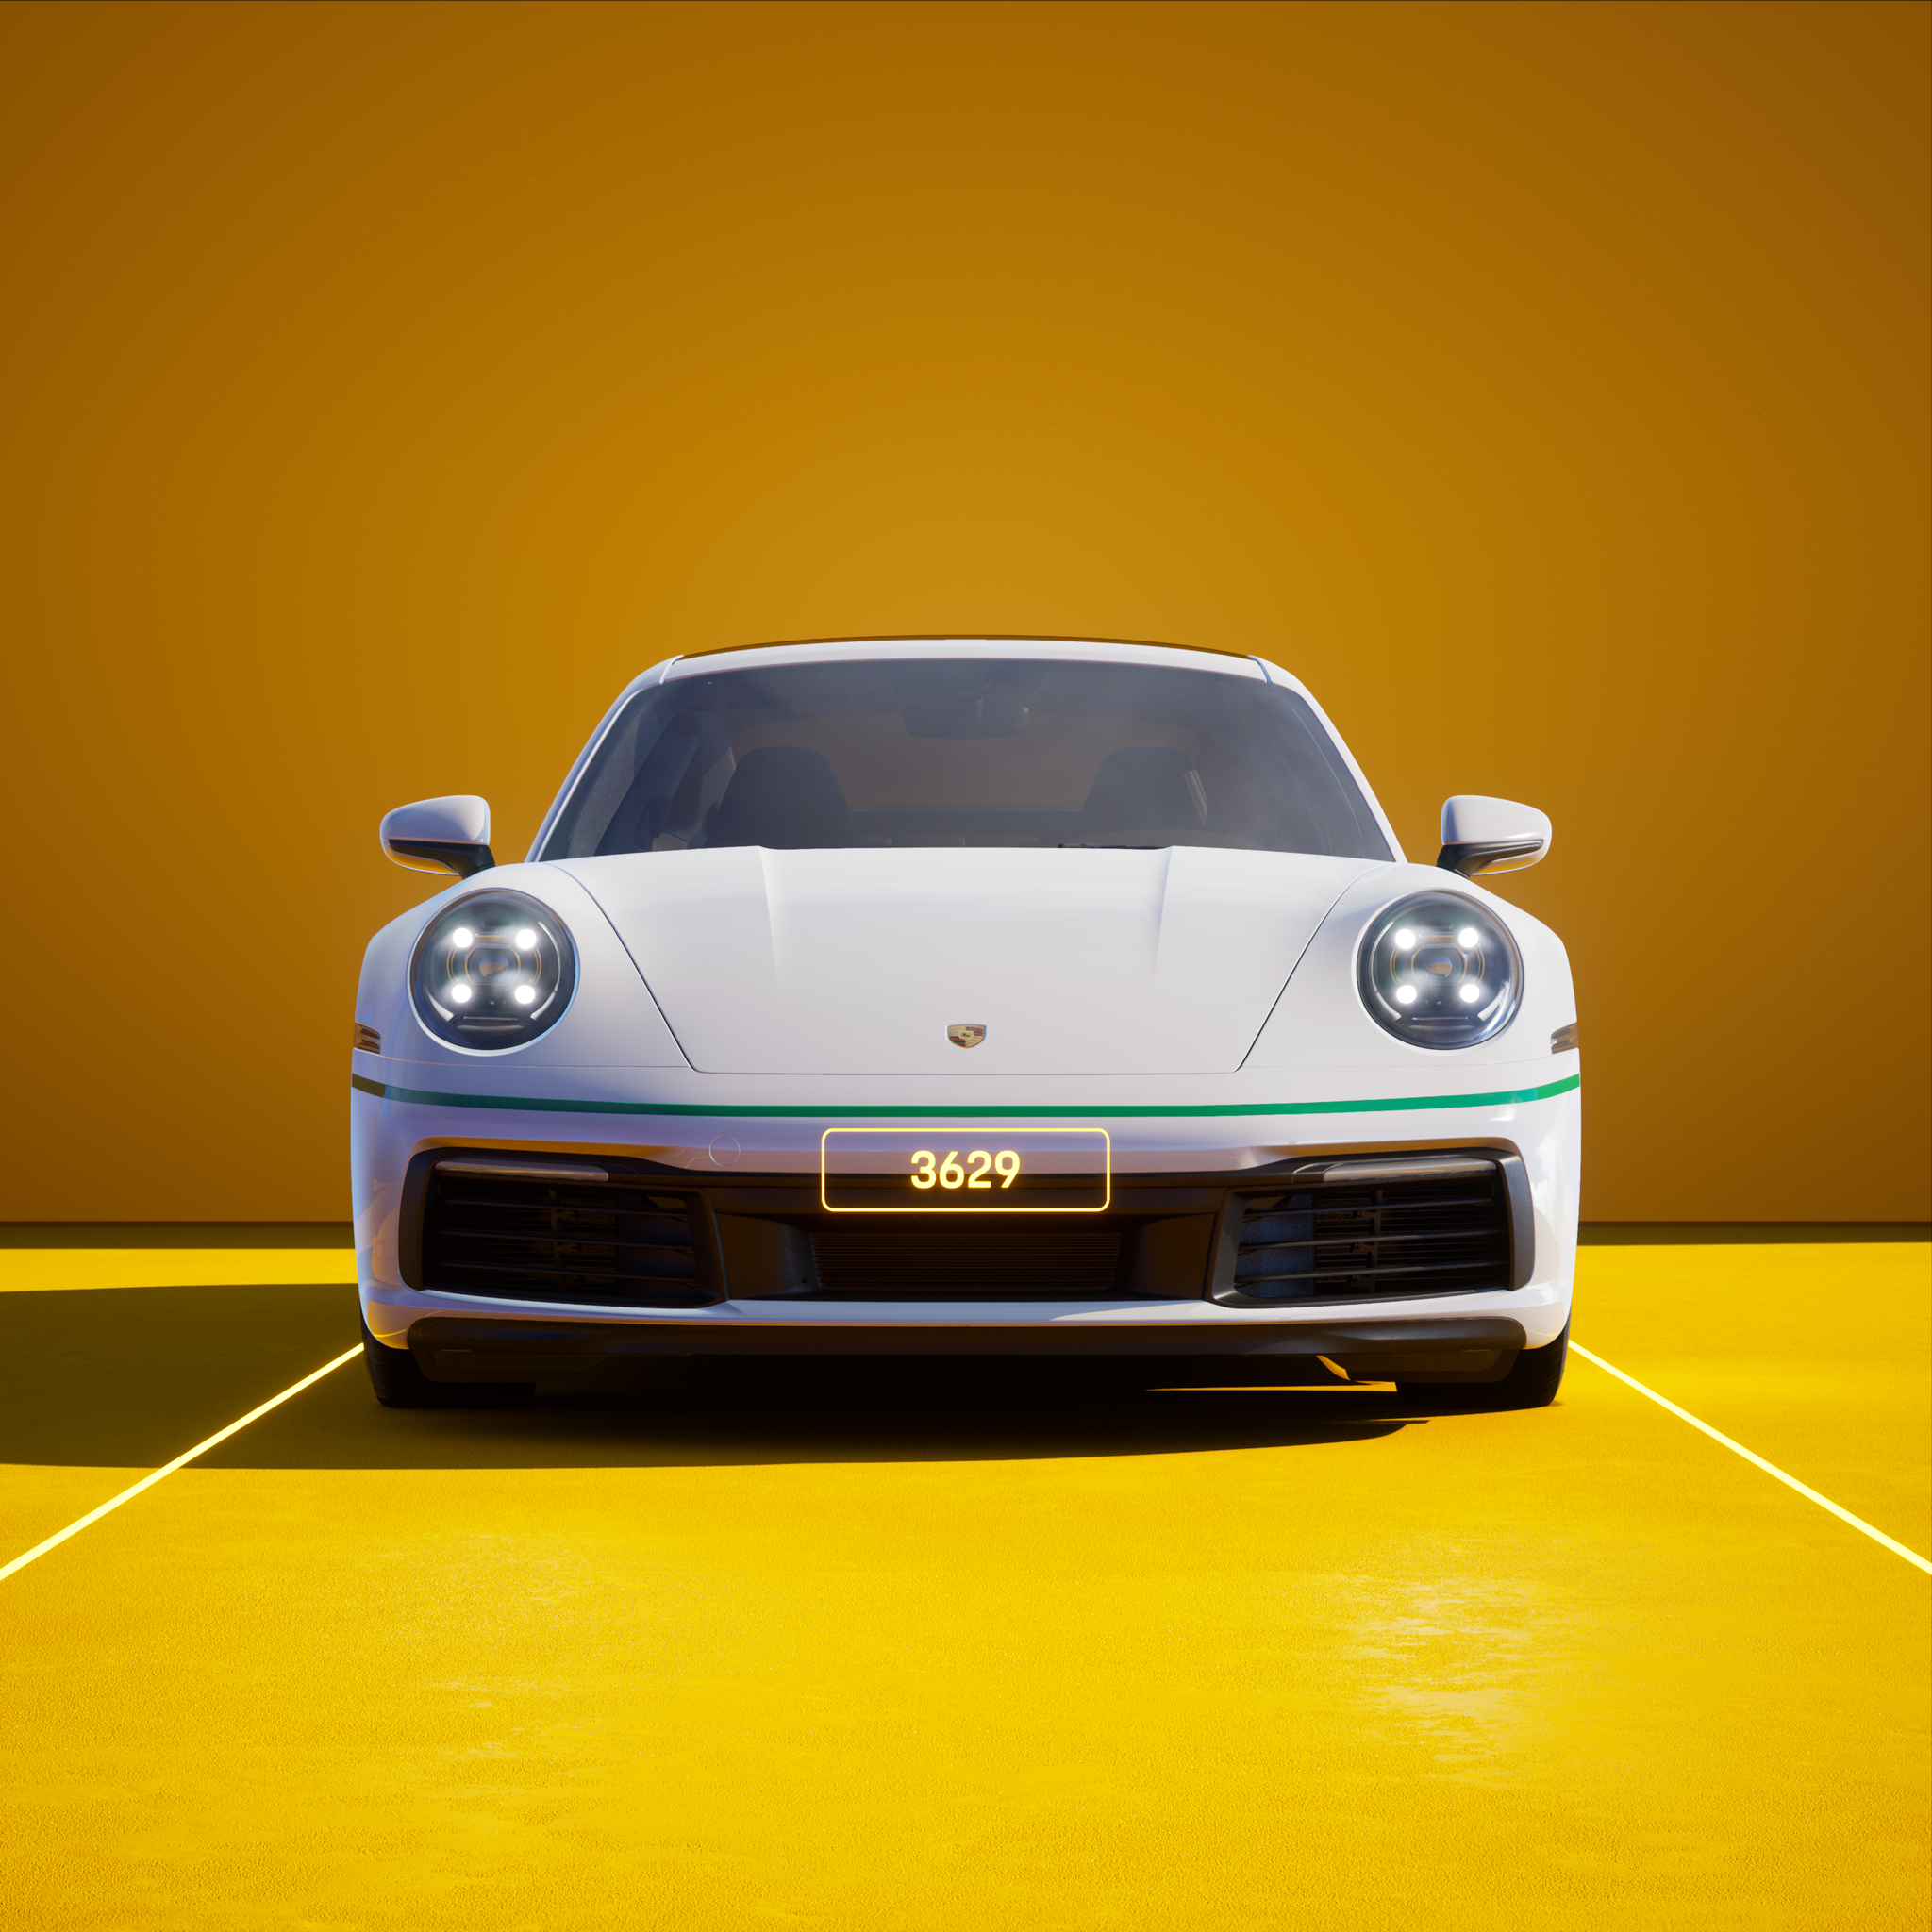 The PORSCHΞ 911 3629 image in phase